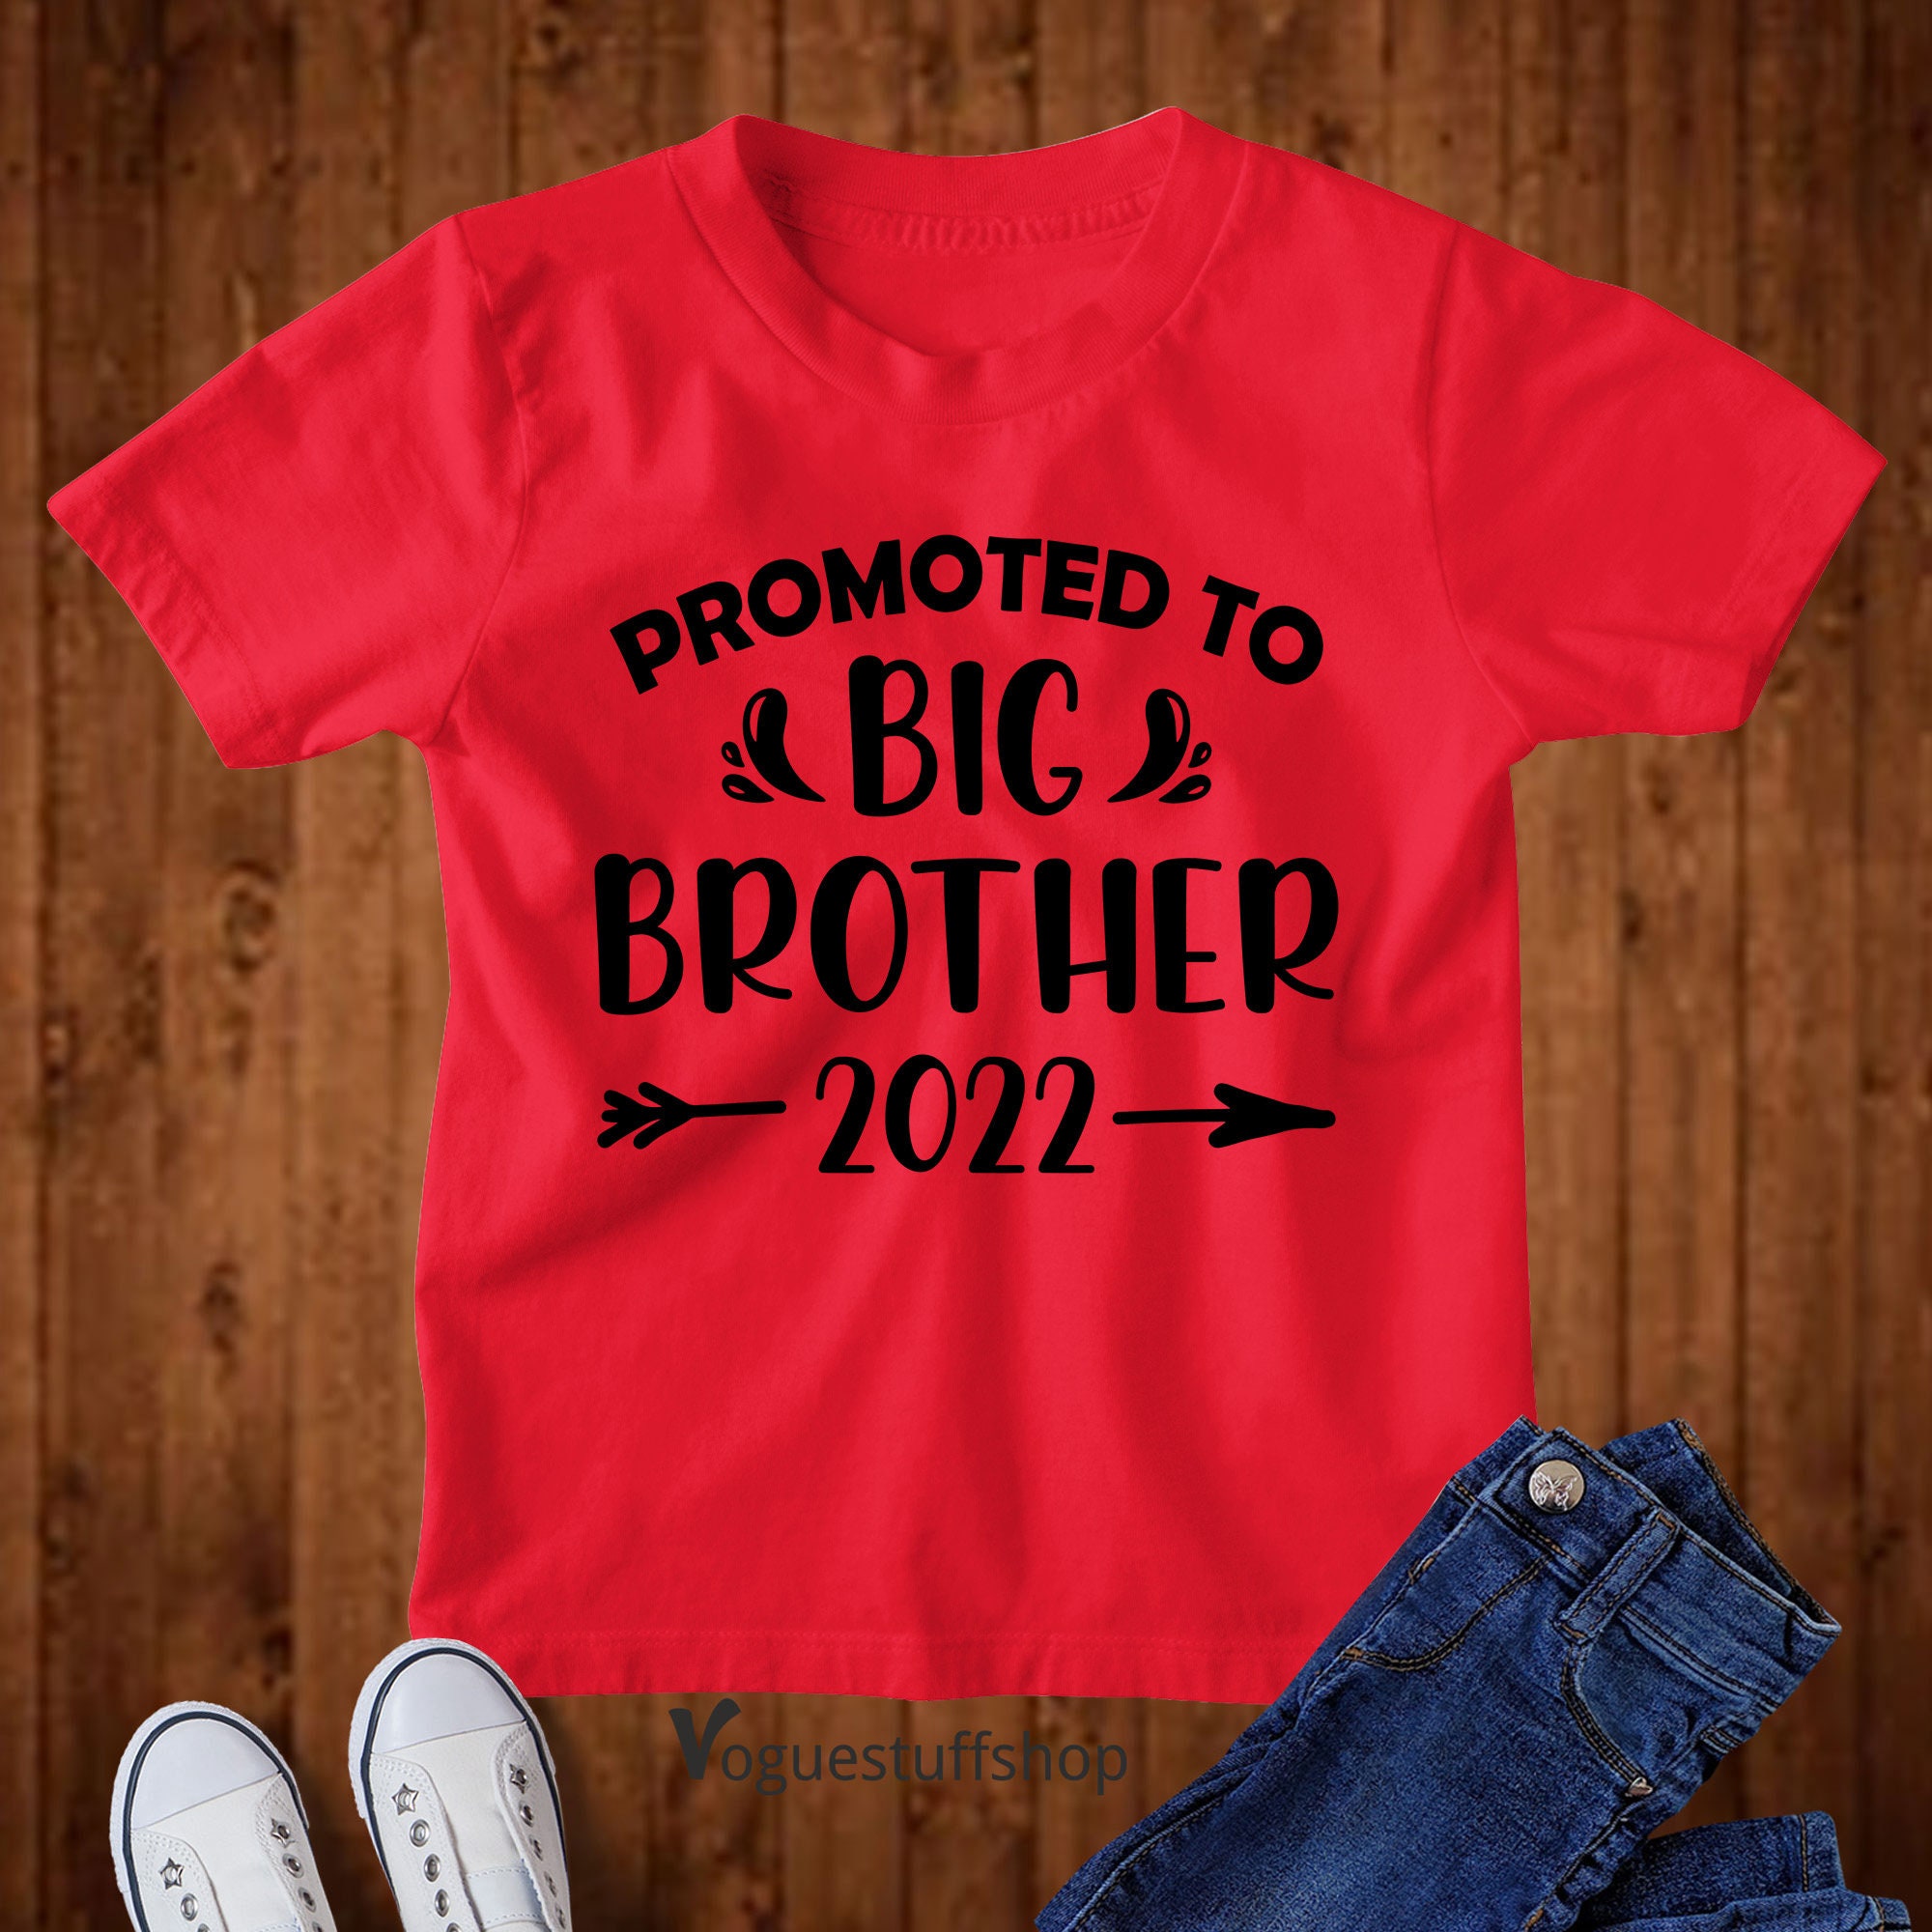 PROMOTED TO BIG BROTHER Boys T-Shirt 1-14 yrs Printed Funny New Gift Present Top 